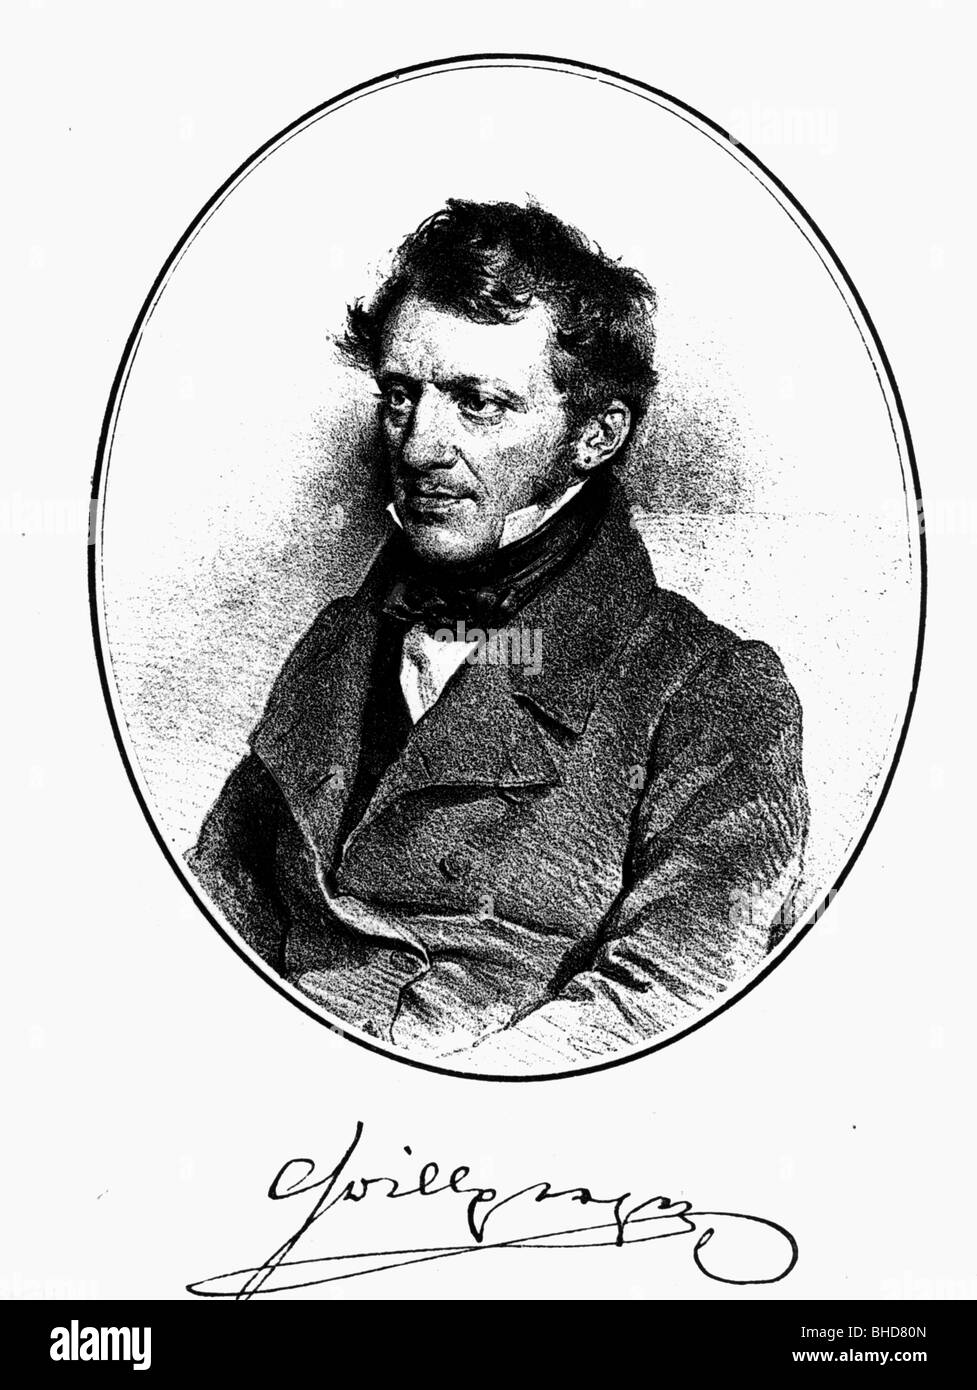 Grillparzer, Franz, 15.1.1791 - 21.1.1872, Austrian author / writer (poet), half length, lithograph in oval, 19th century, Stock Photo